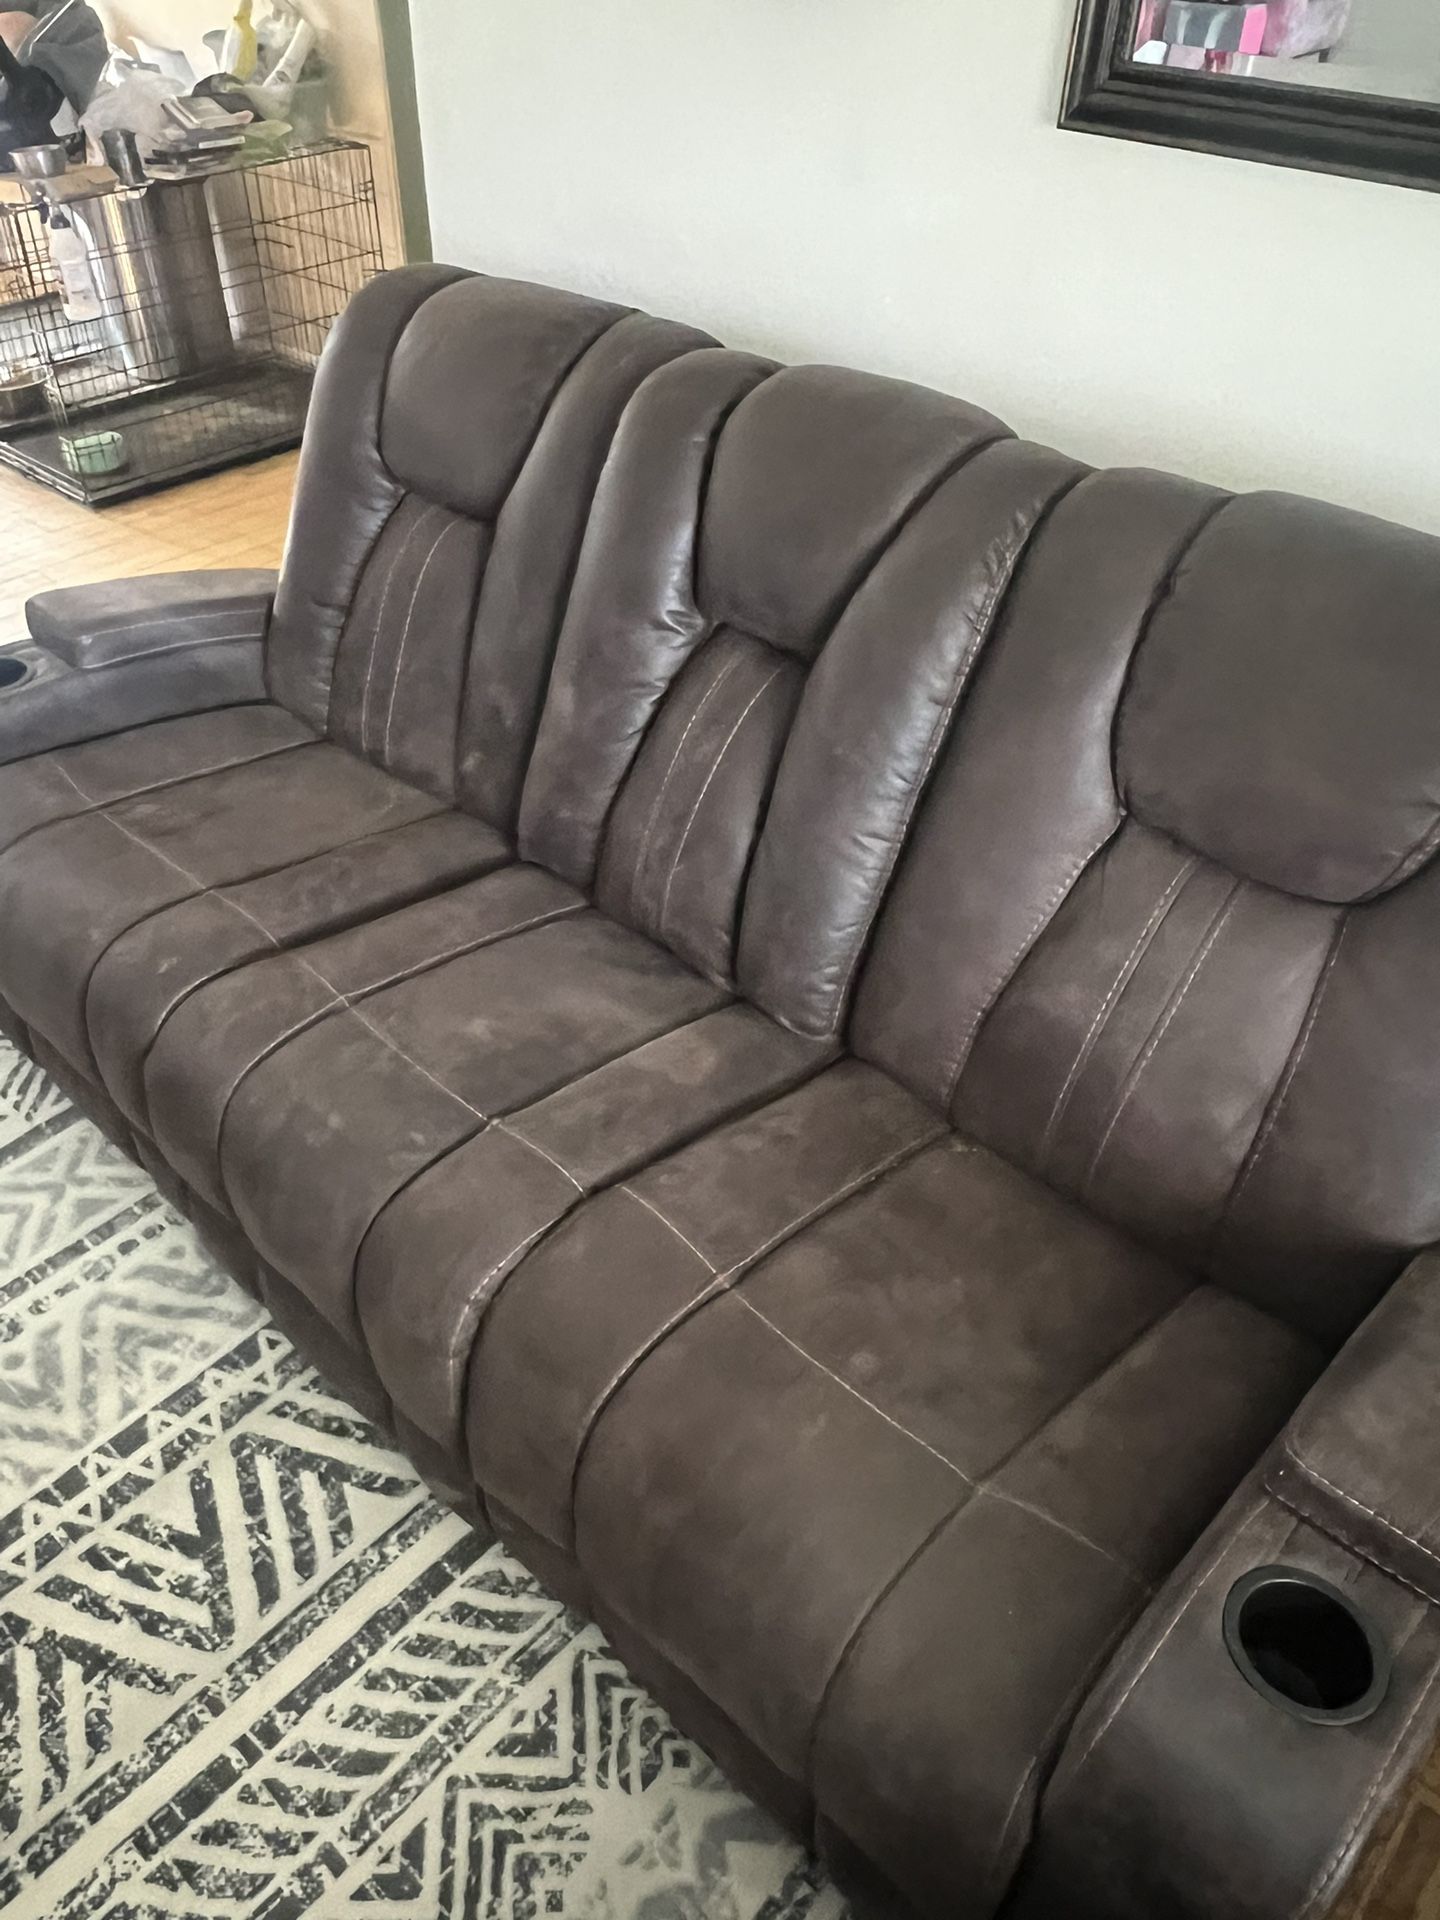 Love Seat And Couch Set 